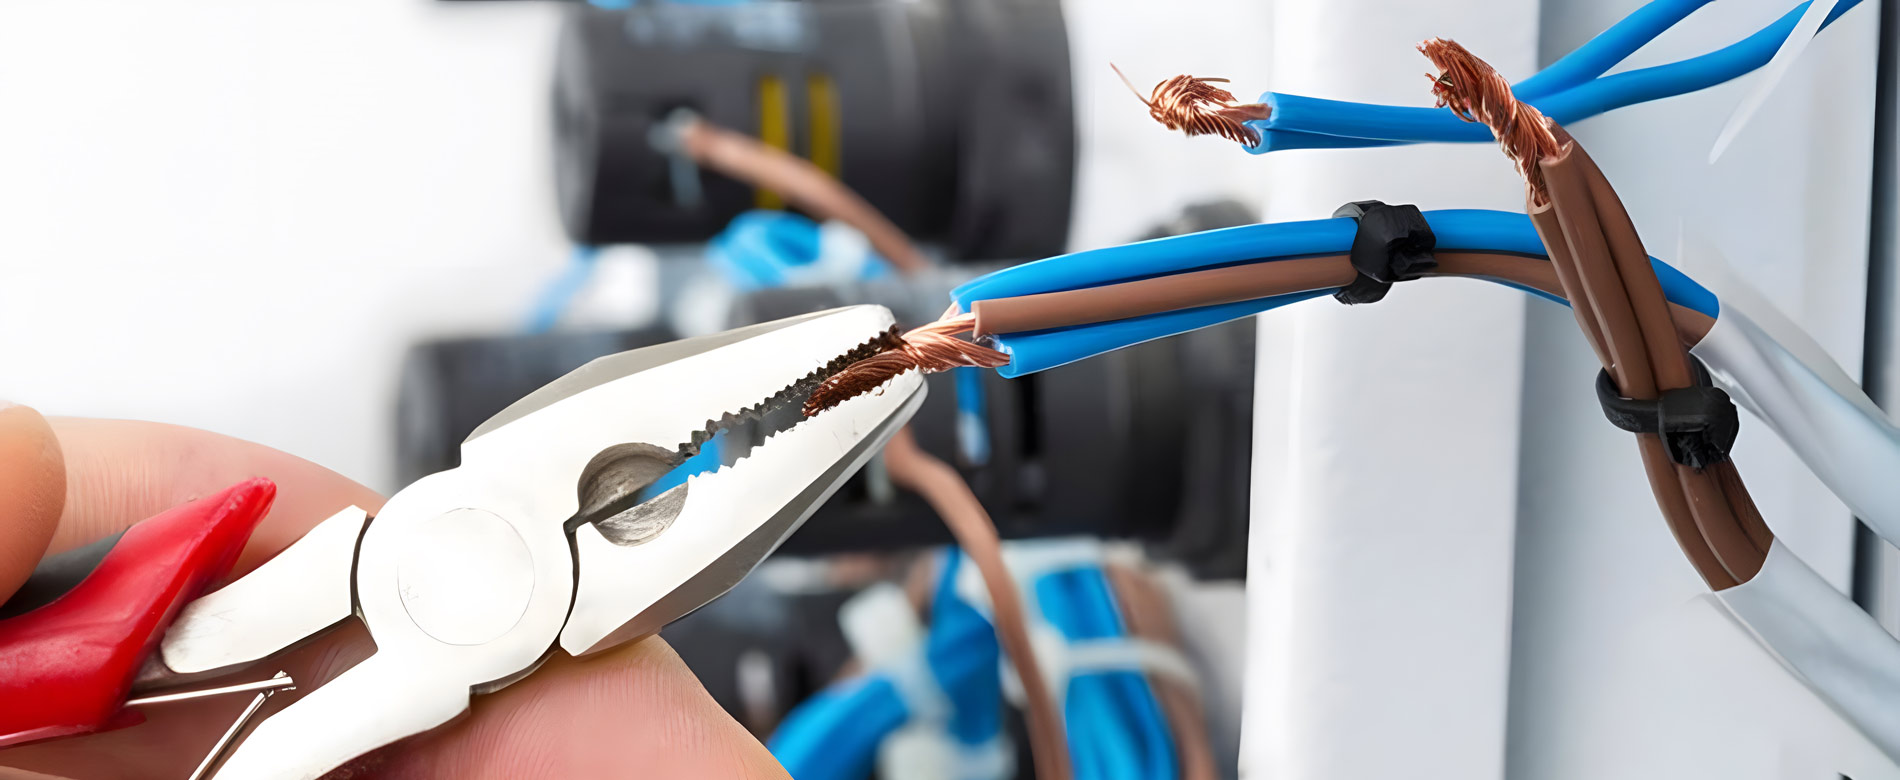 Ronaldson Electrical Construction | Electricians in Tabernacle NJ 08088